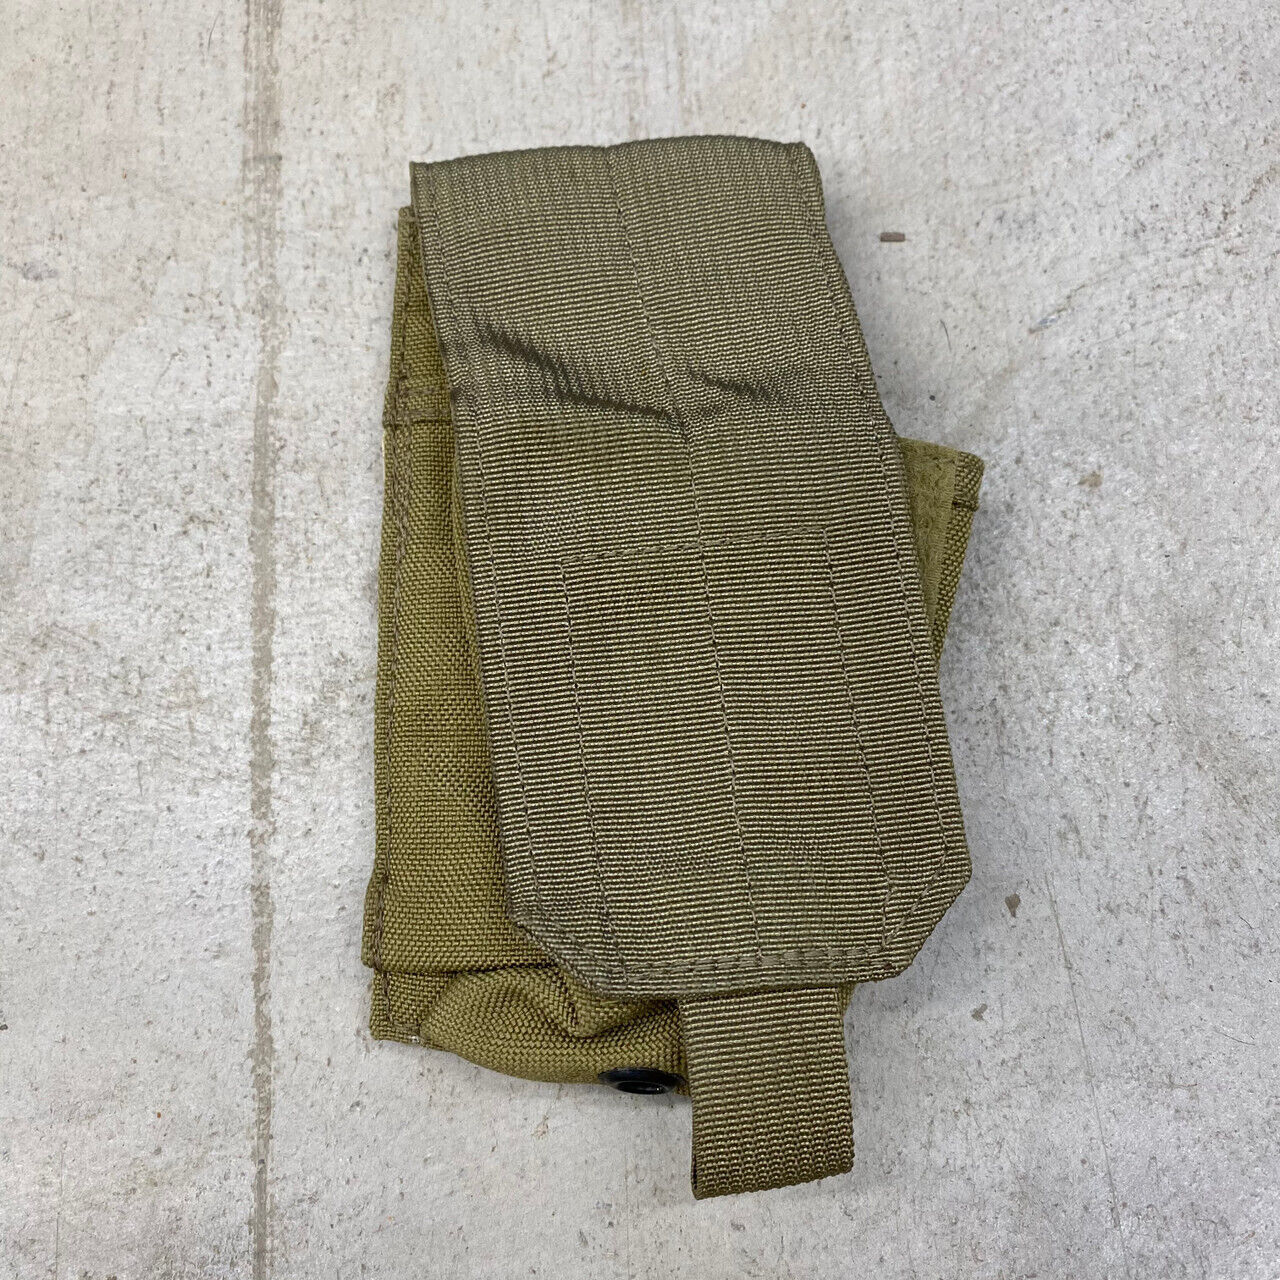 USED Eagle Industries SFLCS Smoke Pouch